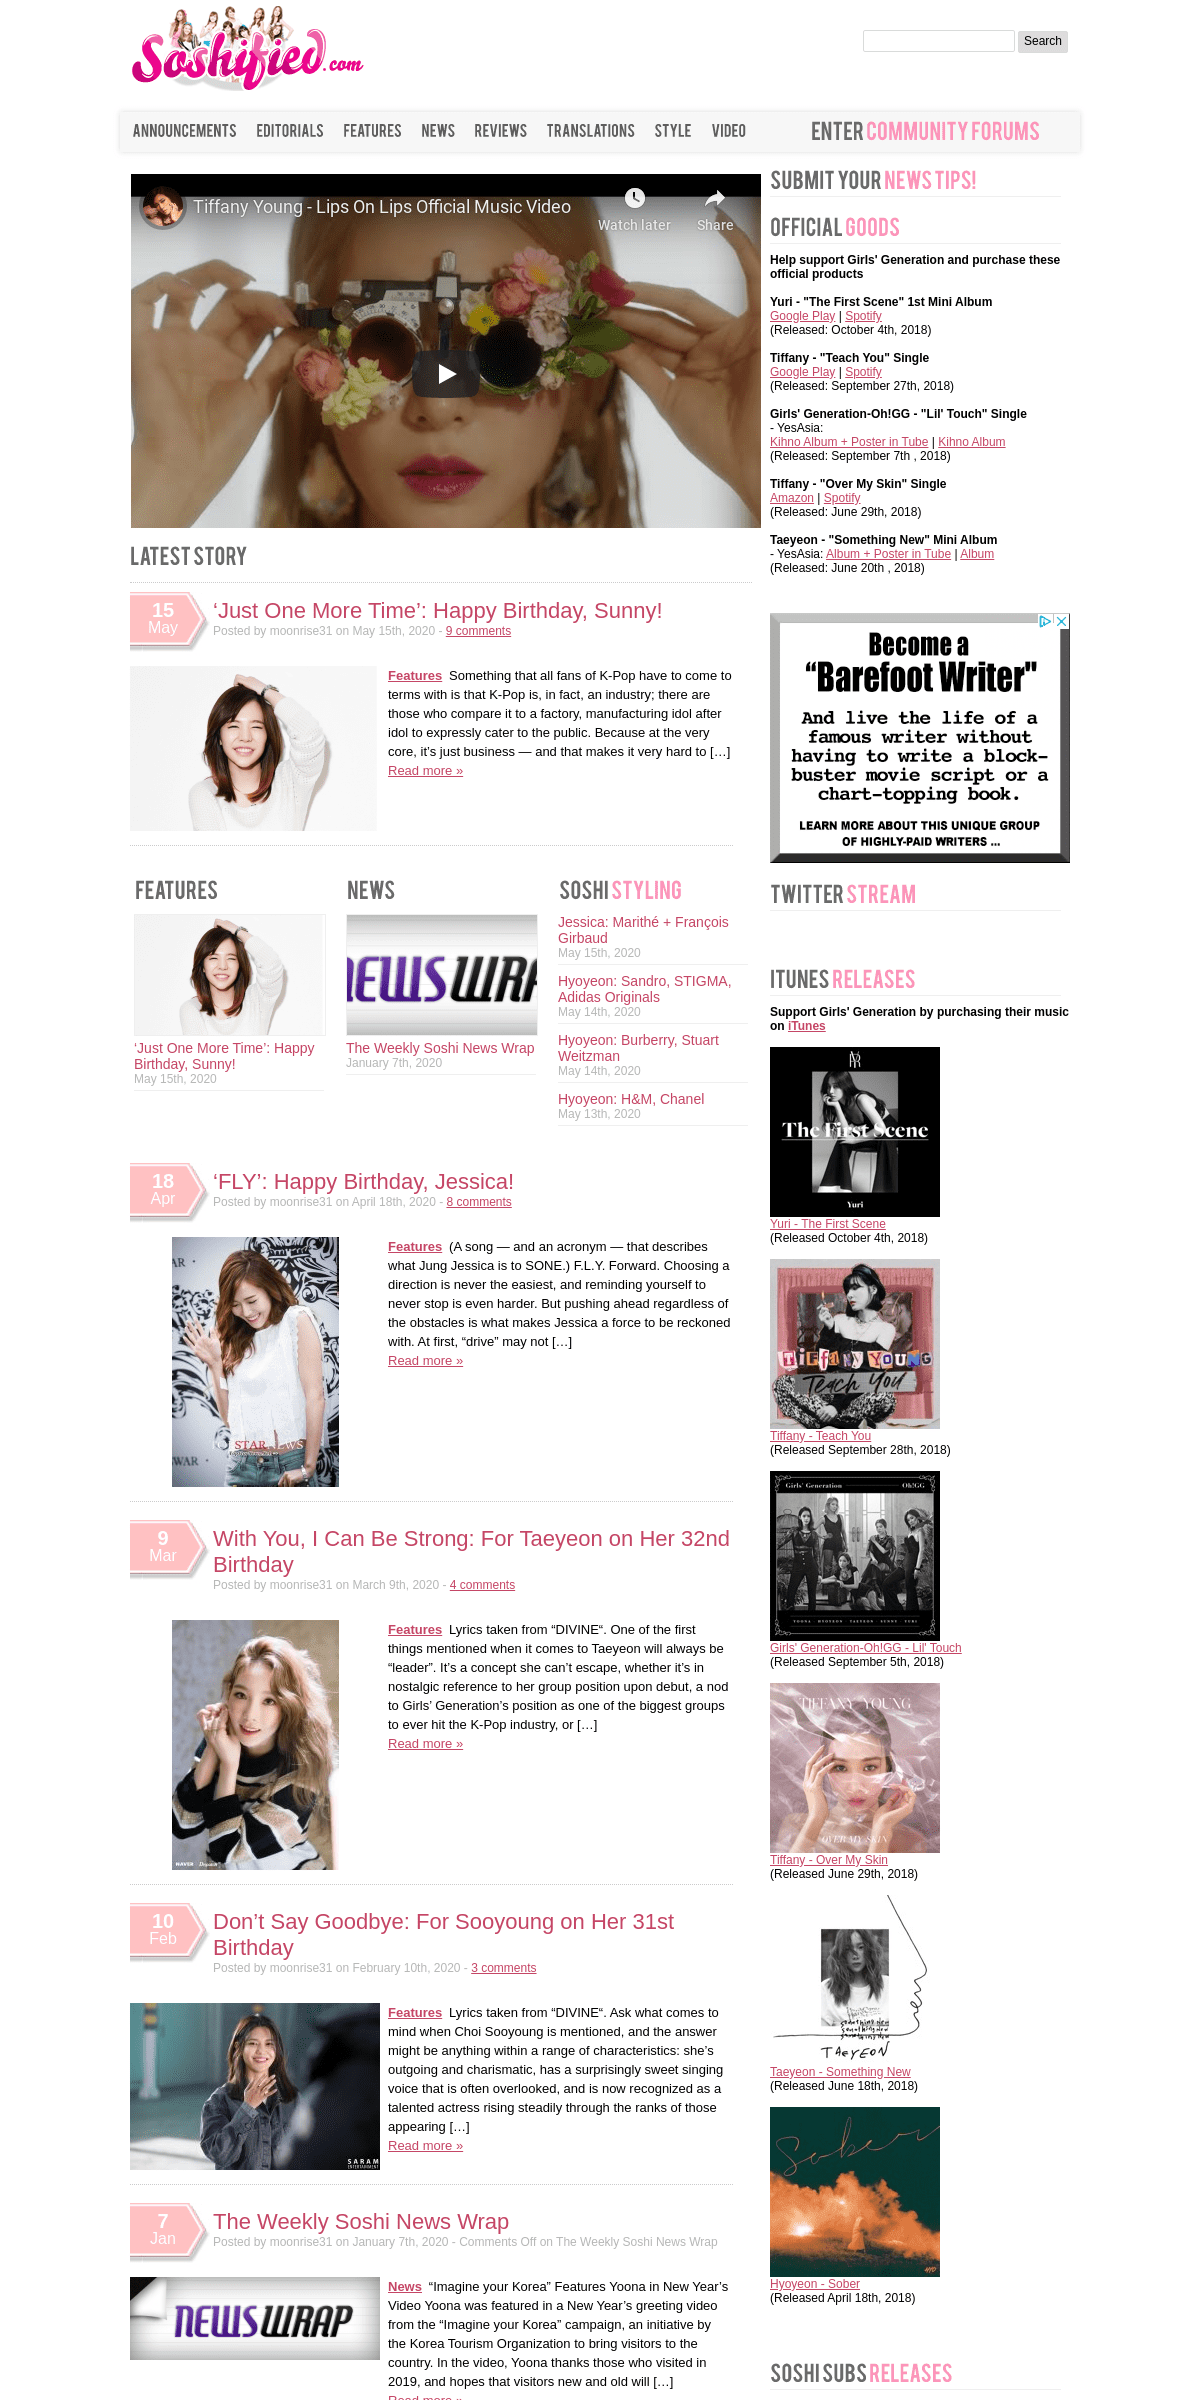 A complete backup of soshified.com